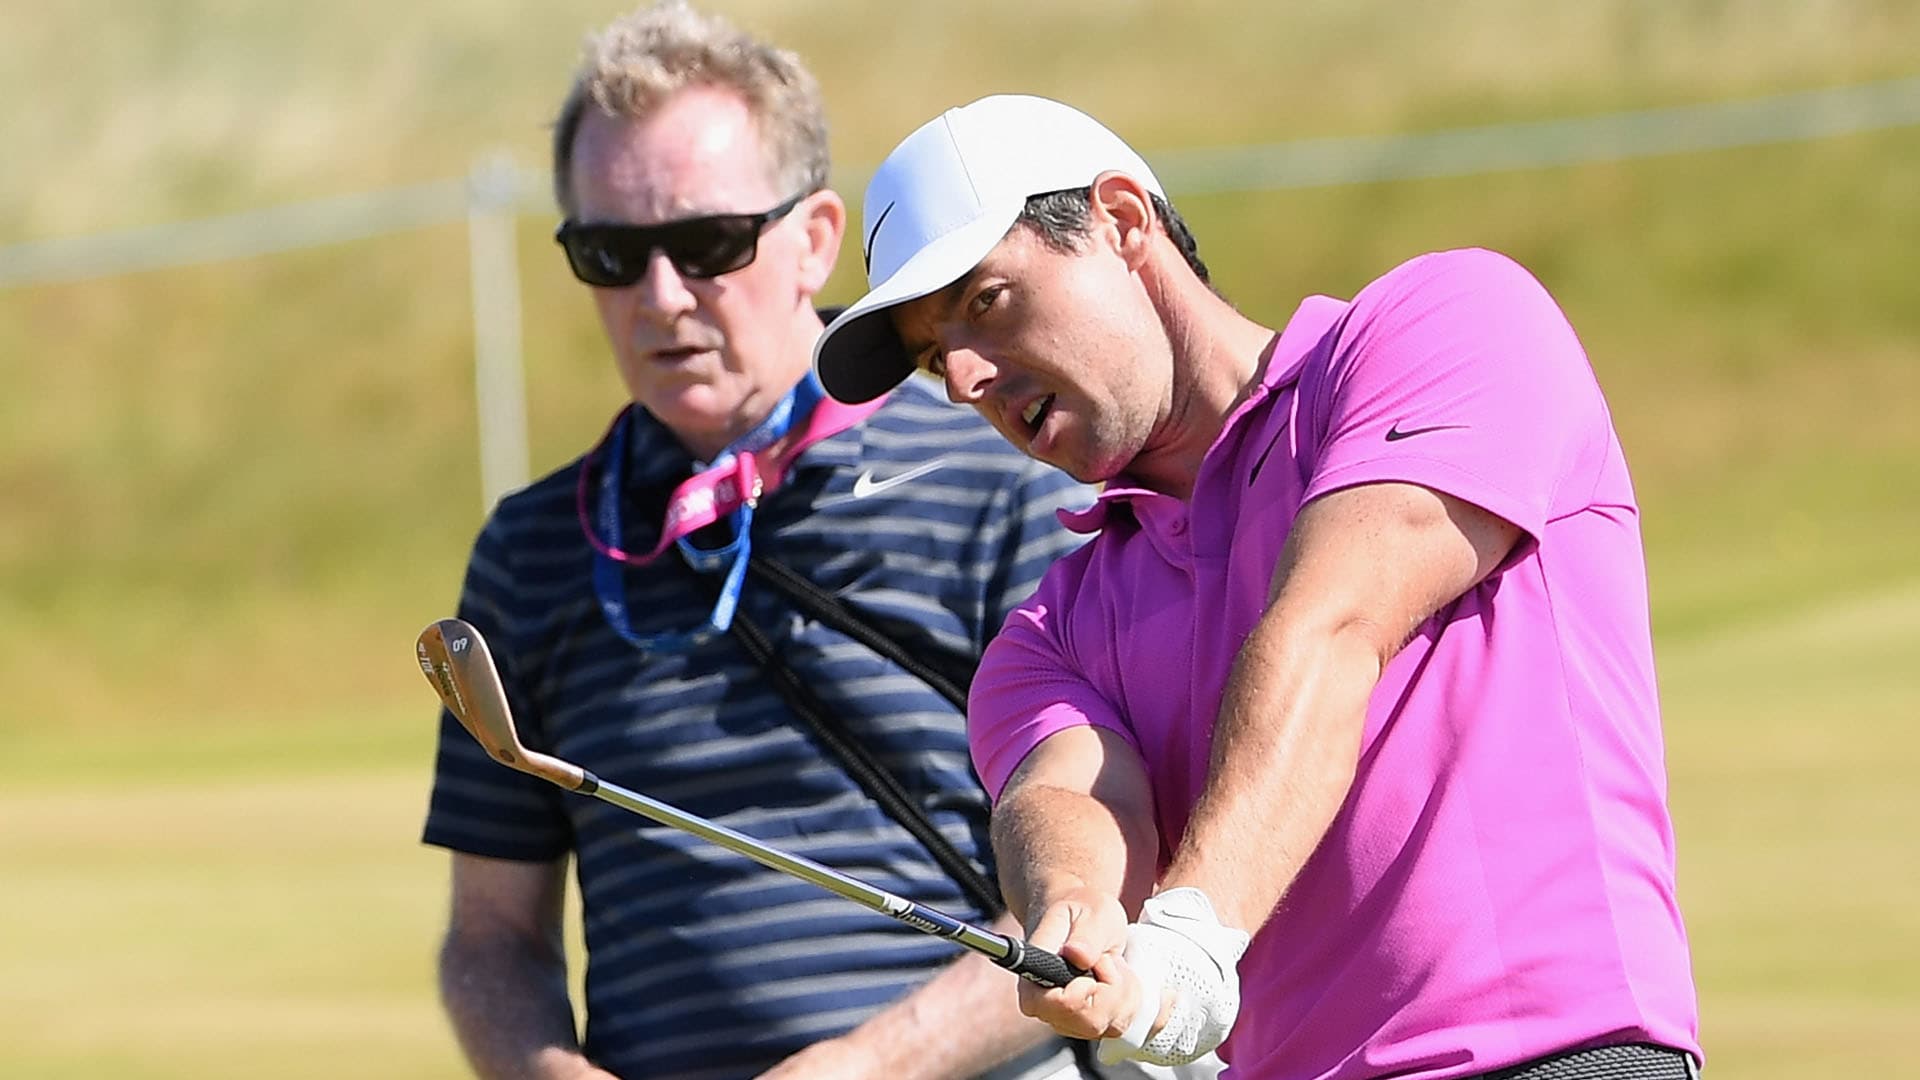 Rory McIlroy feels ‘a bit better’ after swing tune-up with coach Michael Bannon